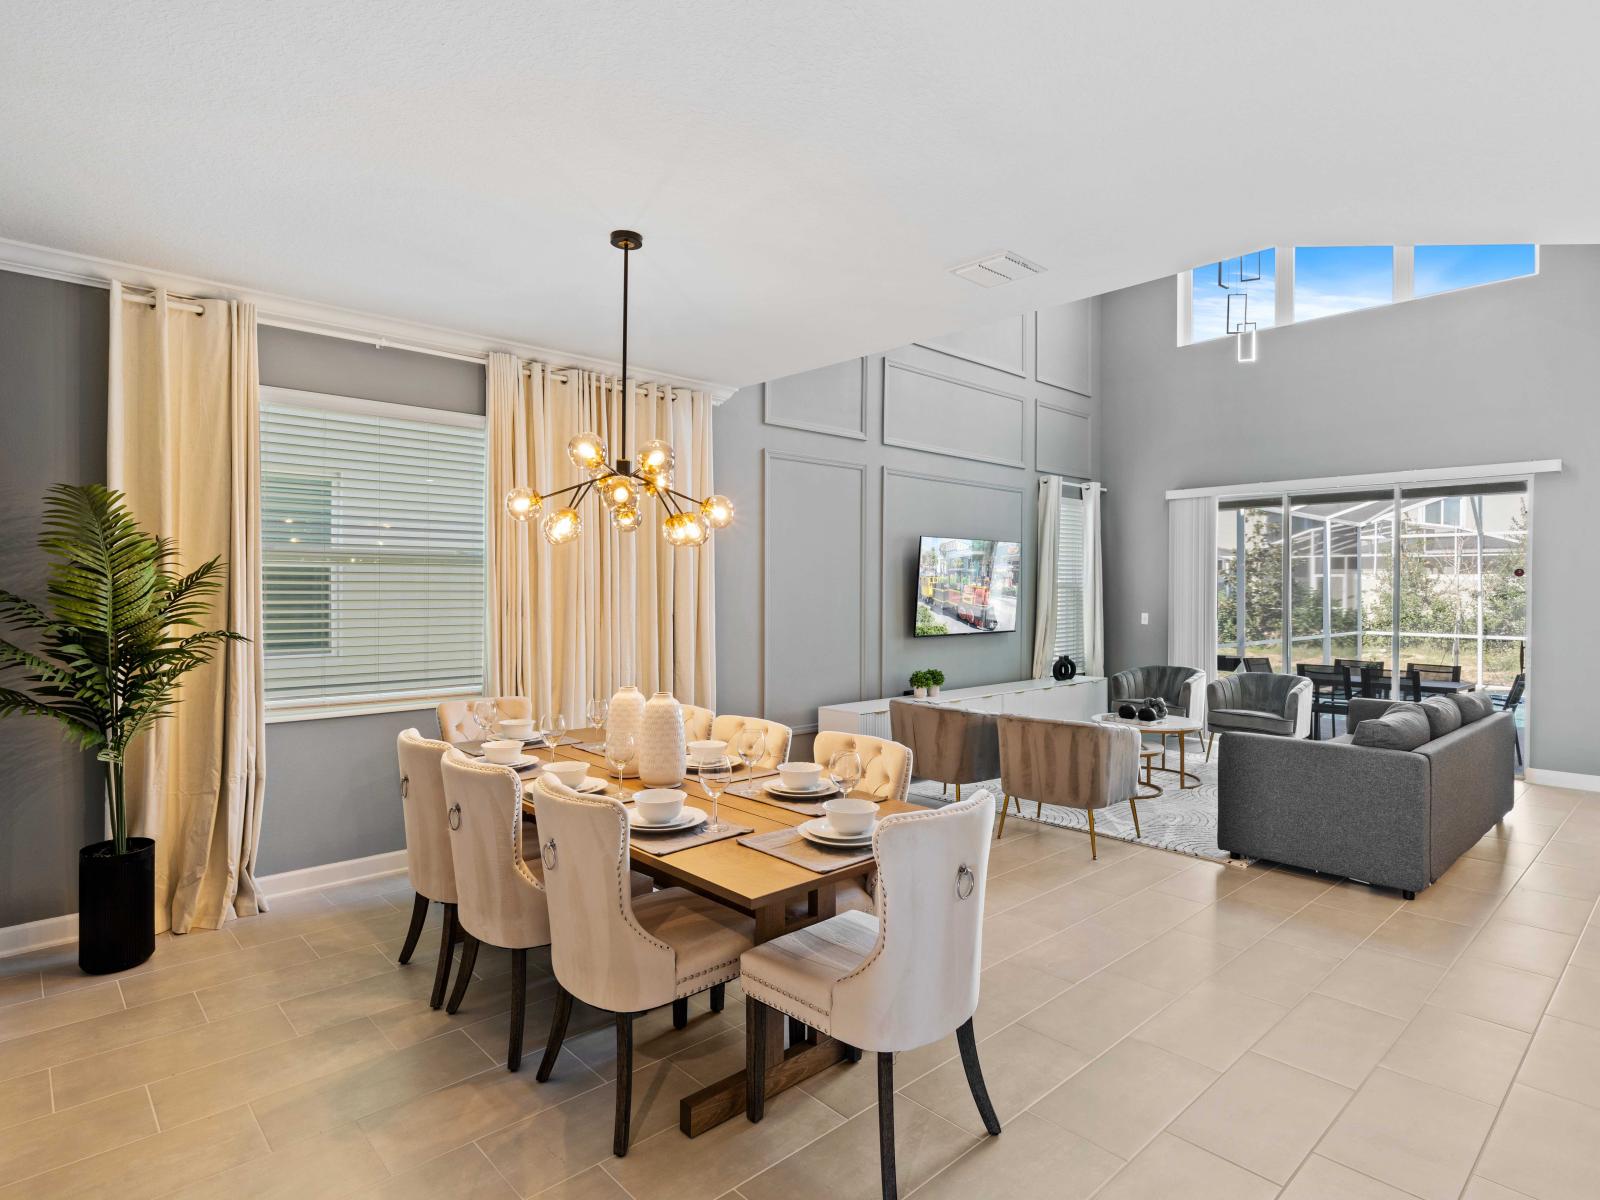 Outstanding Dining Area of the Home in Davenport Florida - Featuring a dining area beside the living space, creating an elegant and convivial setting - 8 Persons Dining - Open-concept living area seamlessly connected to a stylish living space